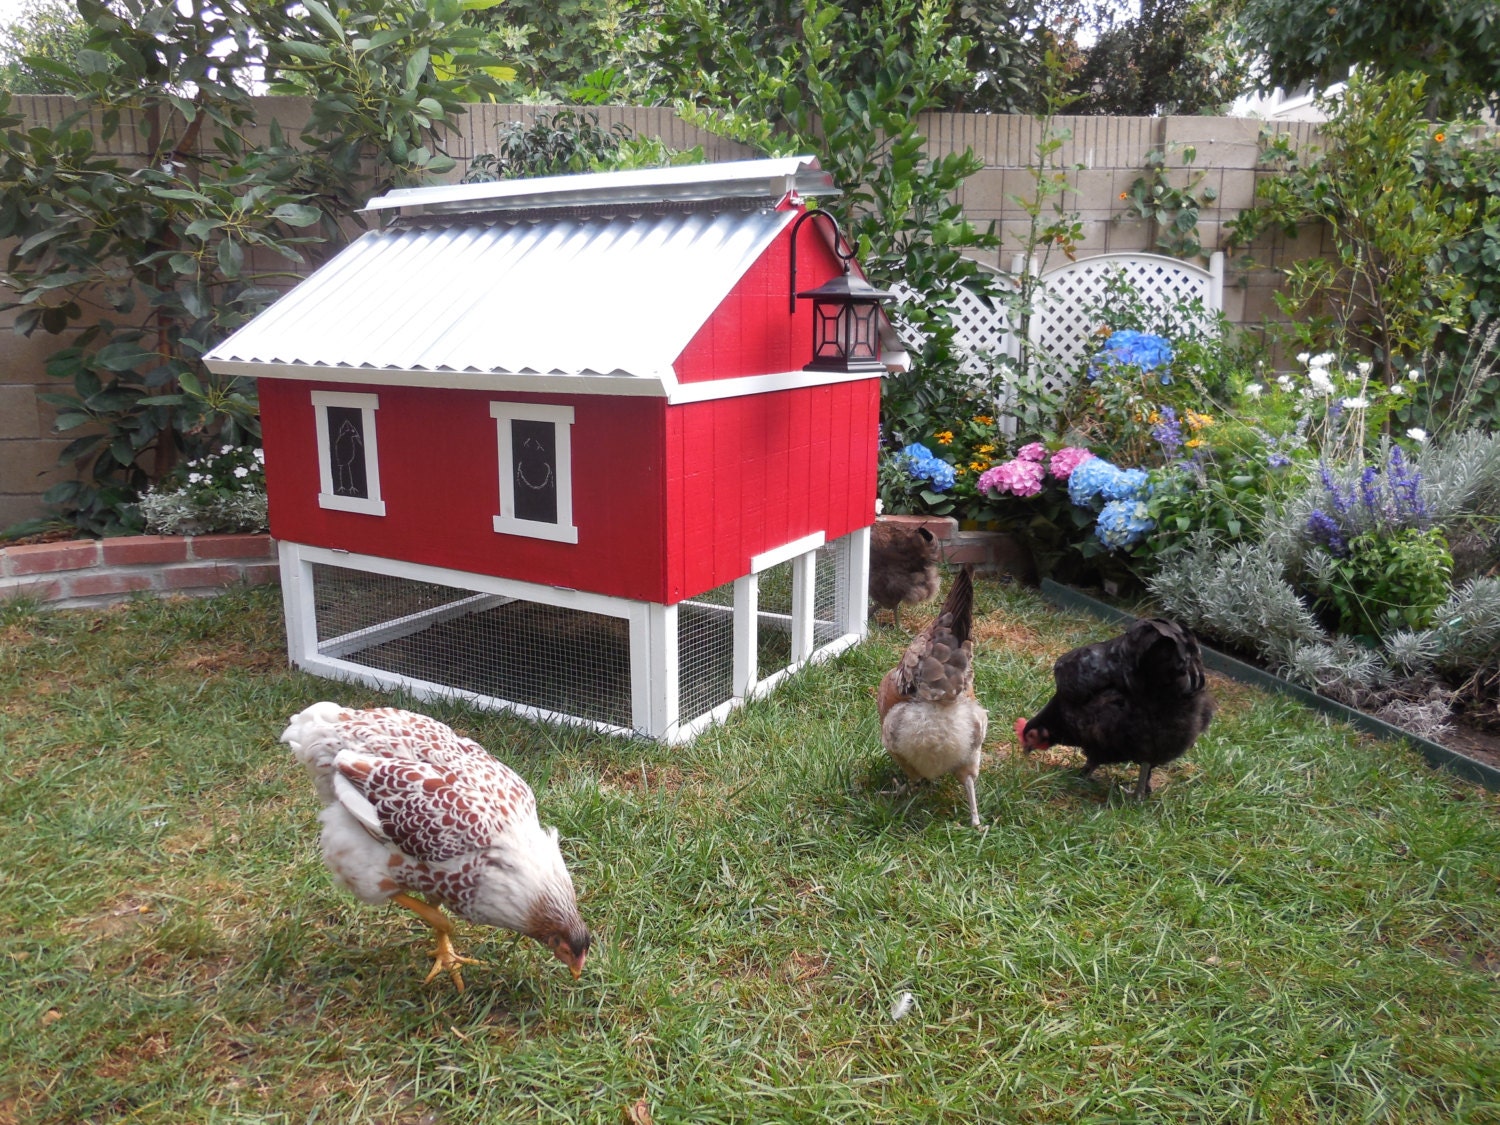 Easy Clean Chicken Coop by TheSmartChickenCoop on Etsy